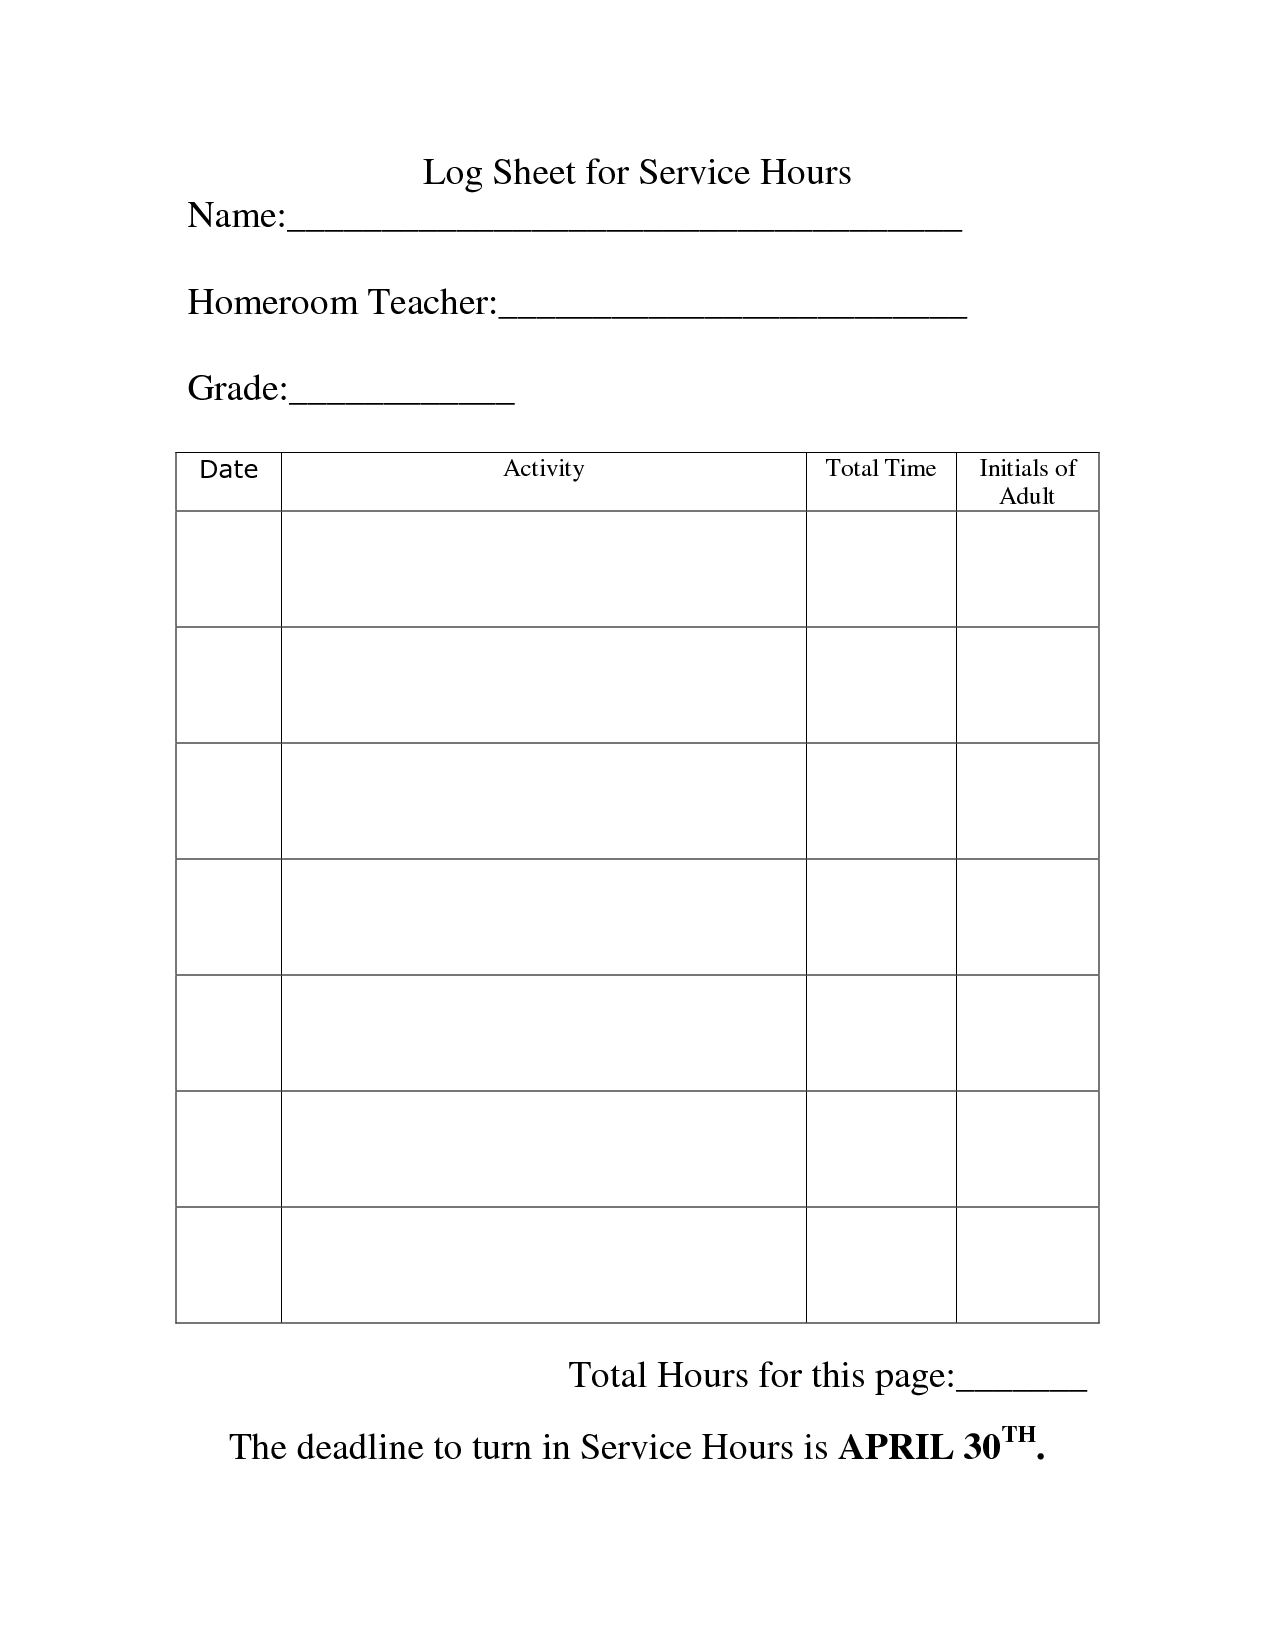 Excel : Community Service Essays Template 5 Community Service - Free Printable Community Service Log Sheet